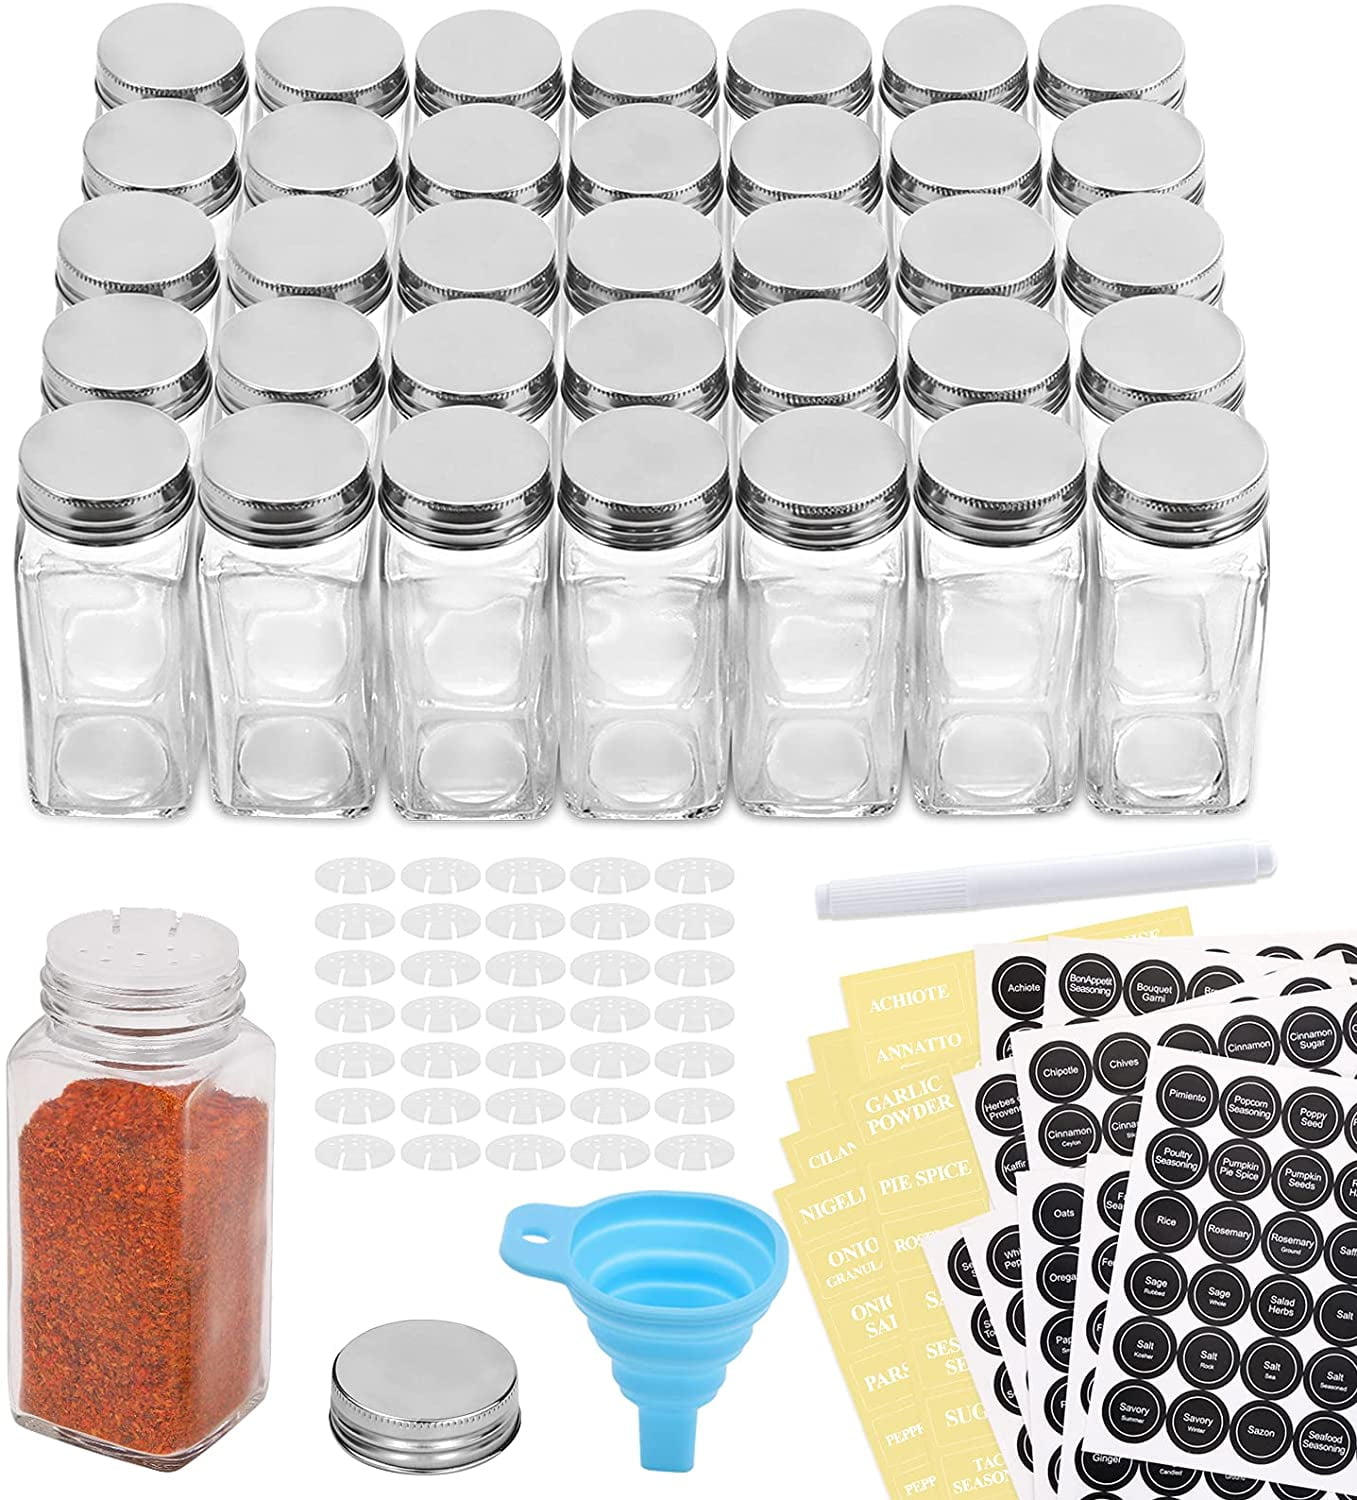 14 Glass Spice Jars Set with 60 Labels Seasoning Container Small Shaker Bottle 